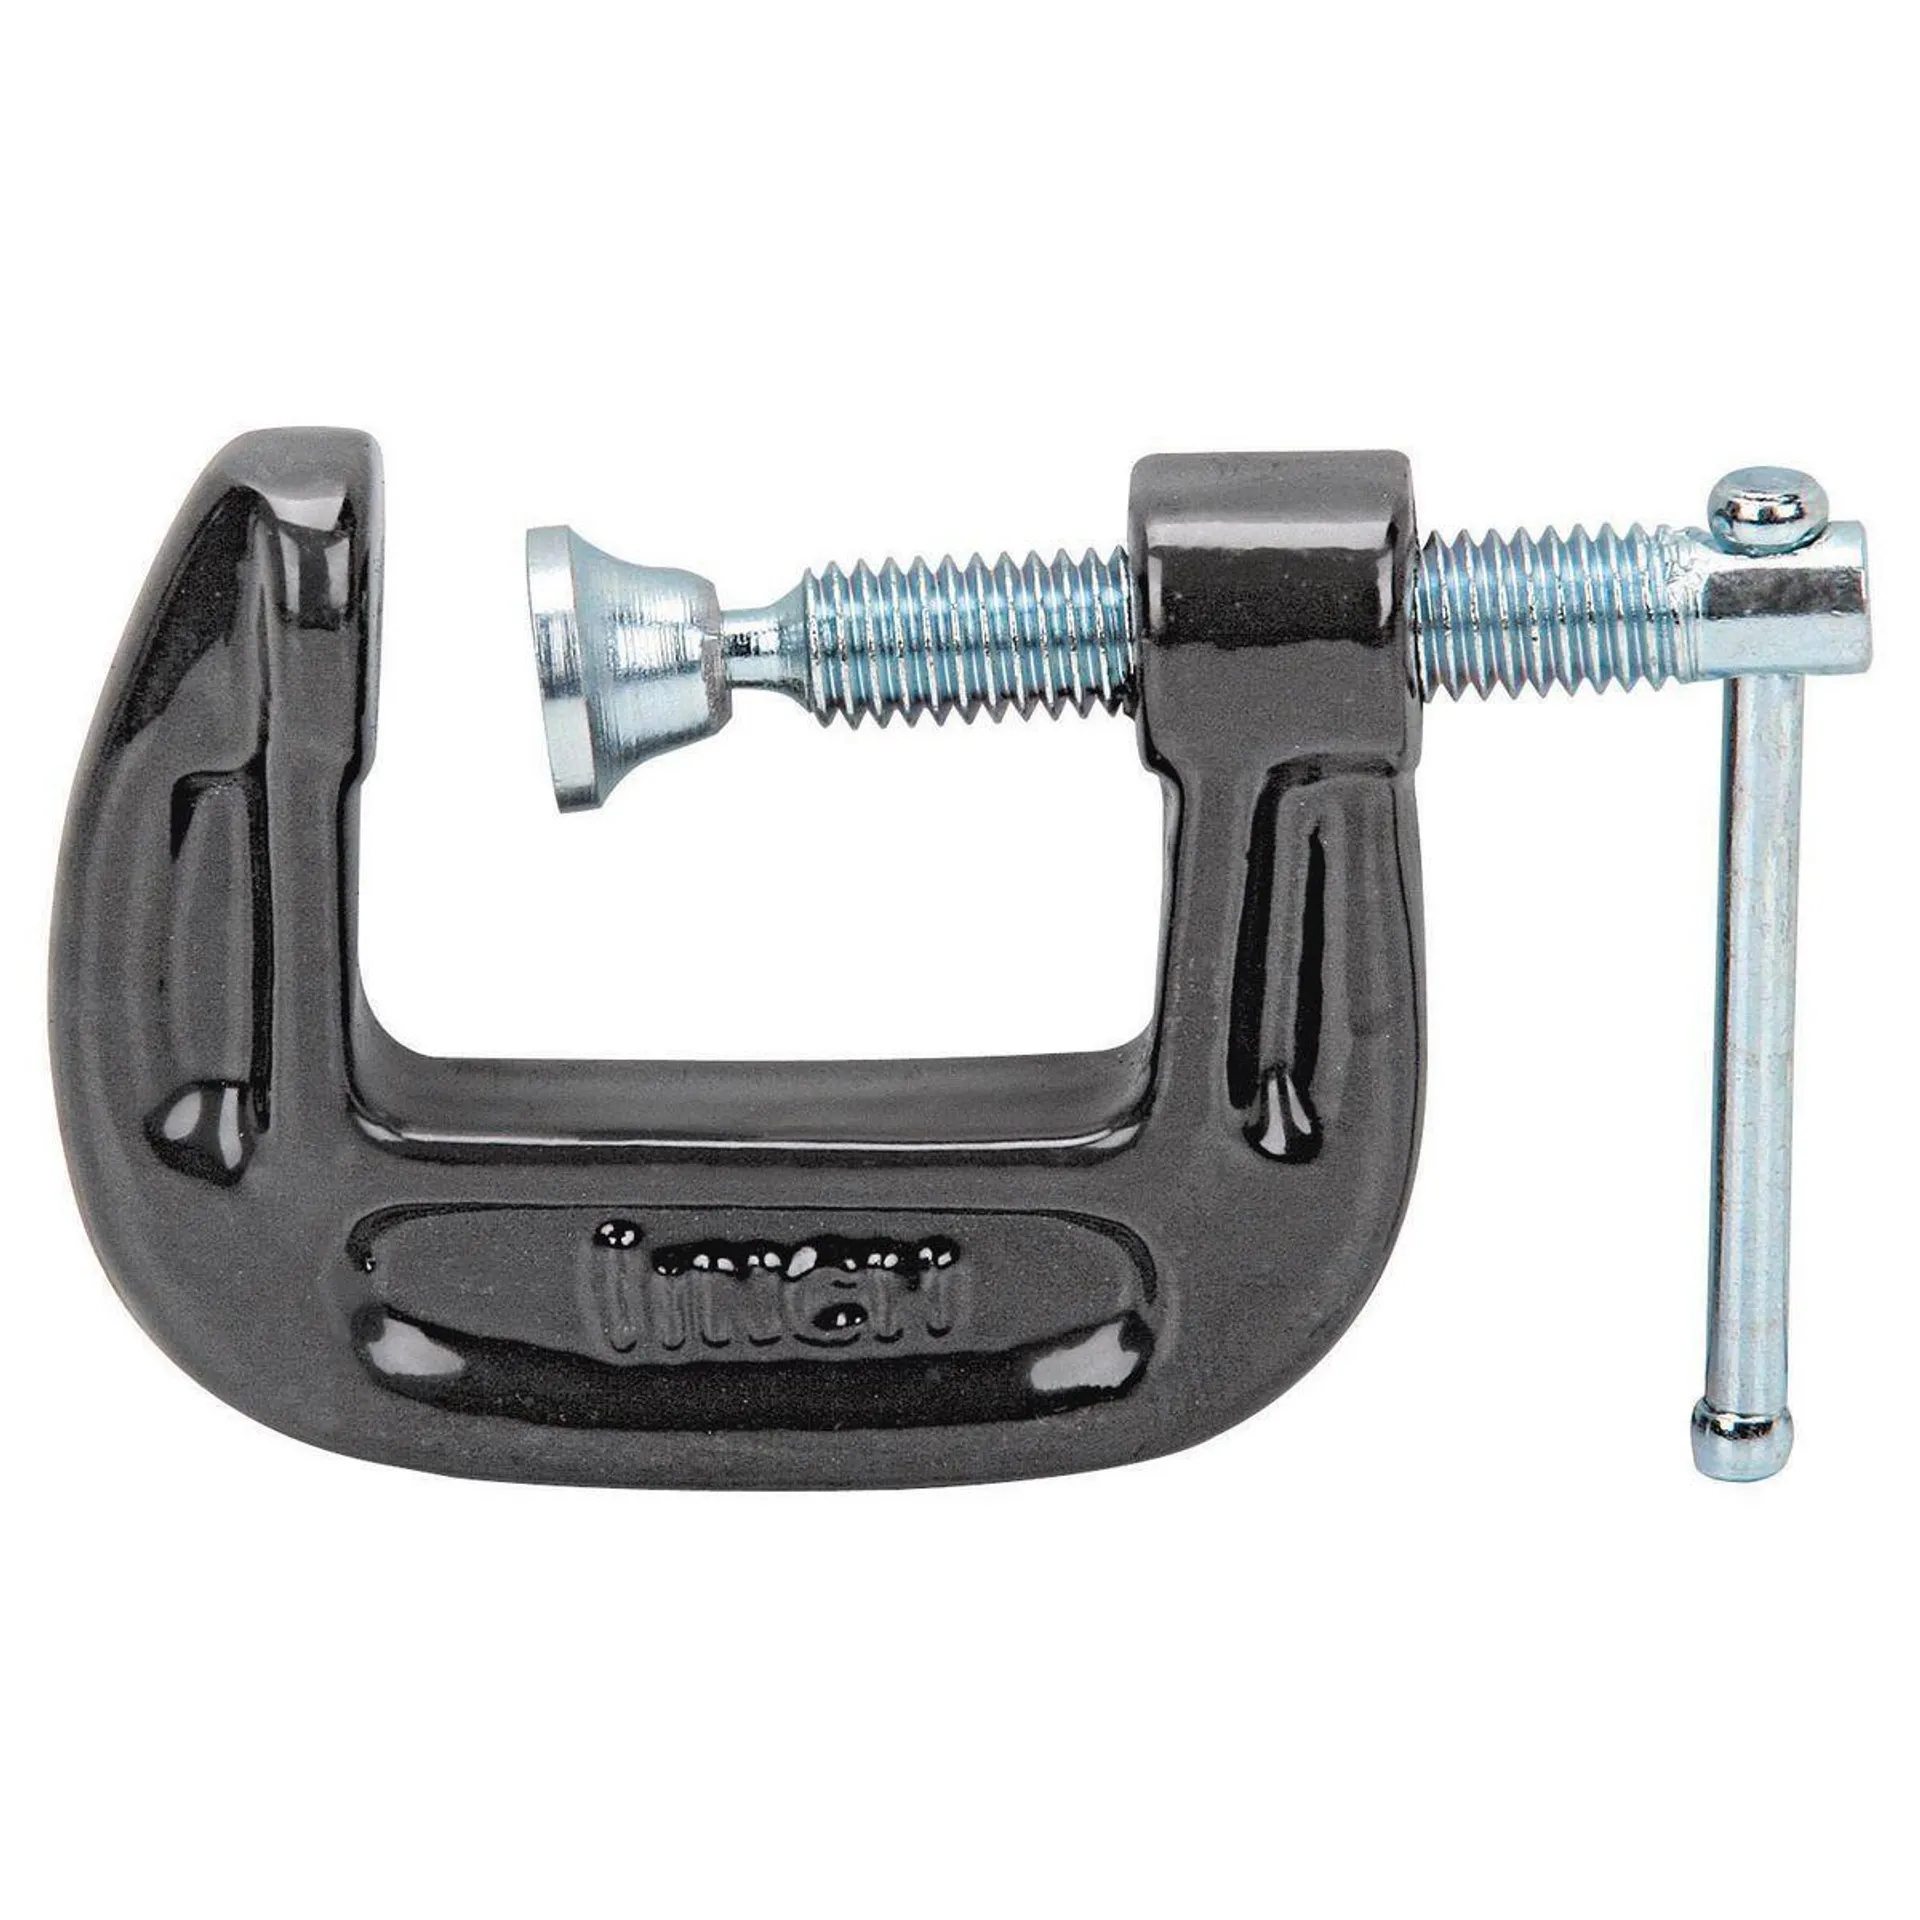 PITTSBURGH 1 in. C-Clamp